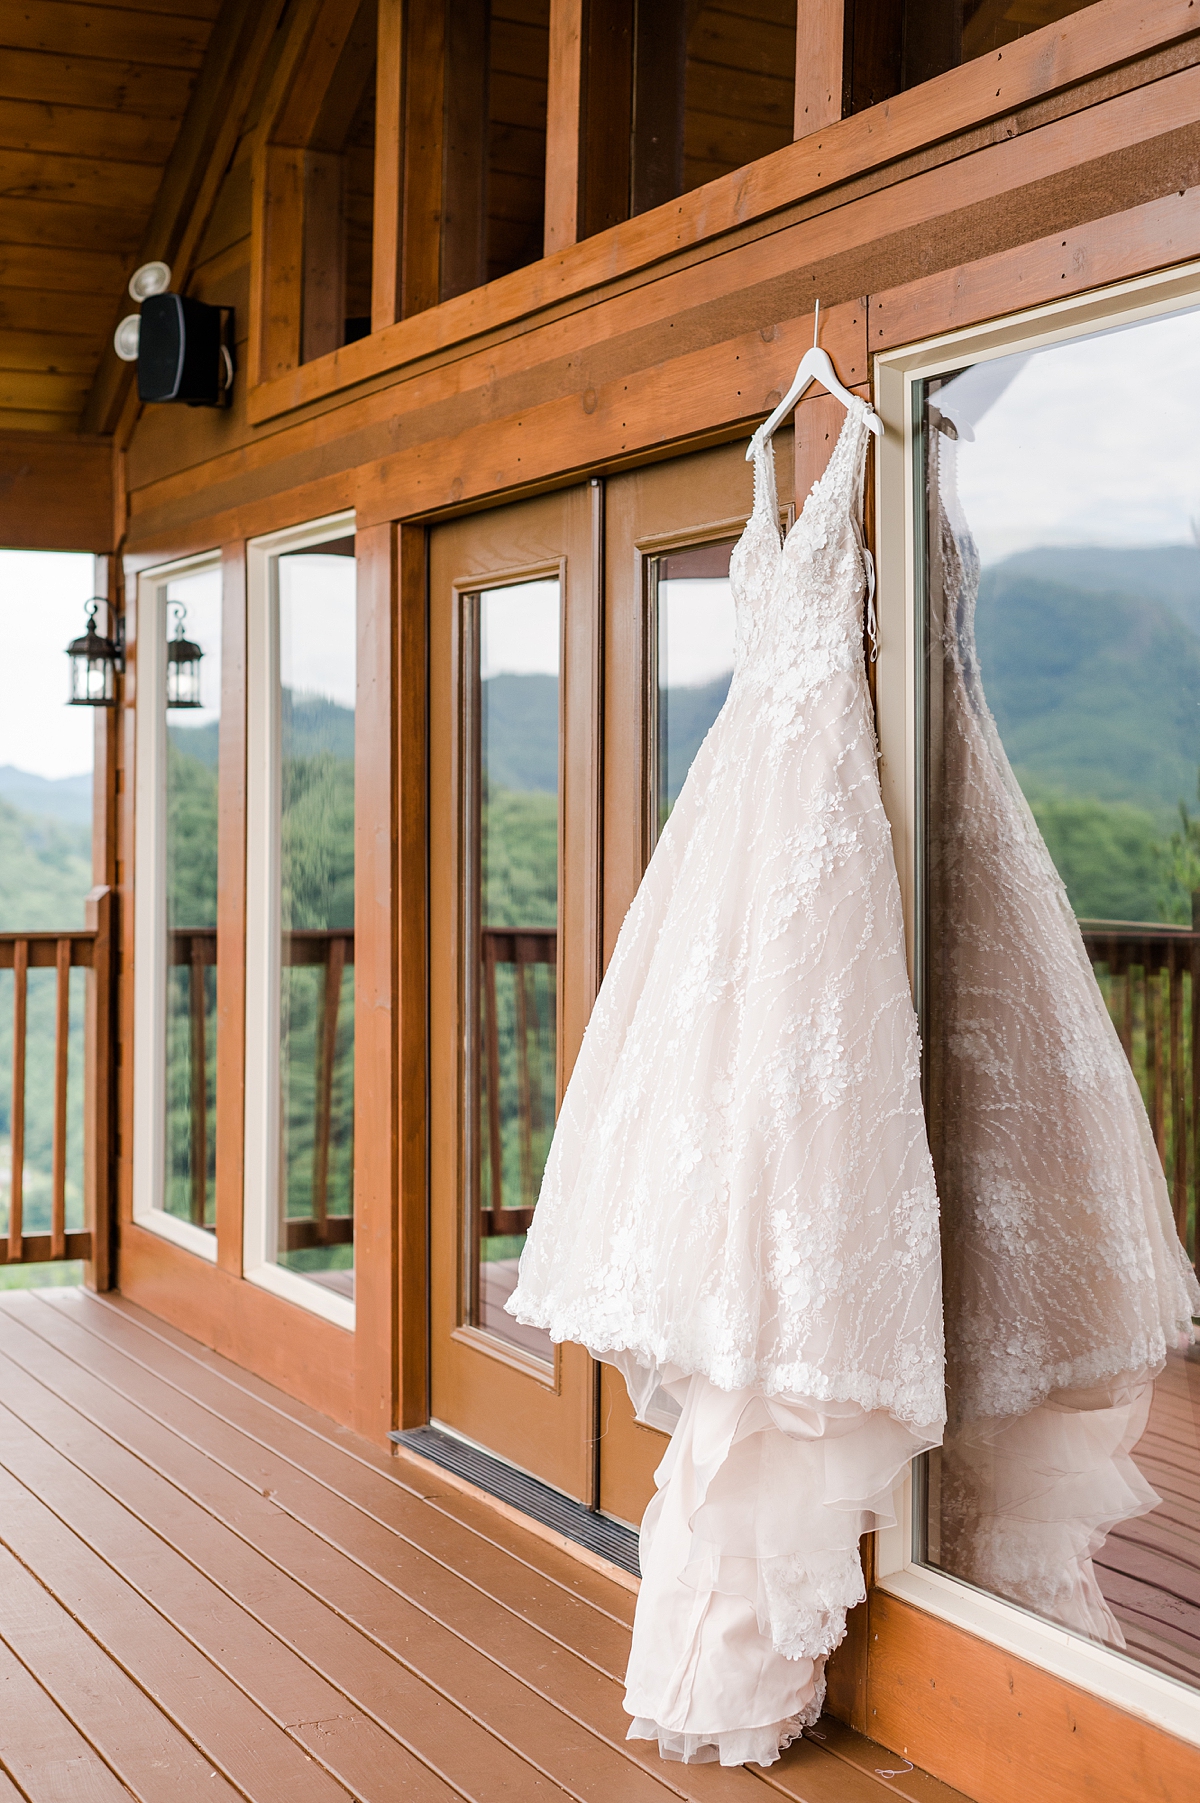 Wedding Dress Hanging with Mountain Views at a Magnolia Venue Summer Mountain Wedding in Tennessee. Wedding Photography by Virginia Wedding Photographer Kailey Brianne Photography. 